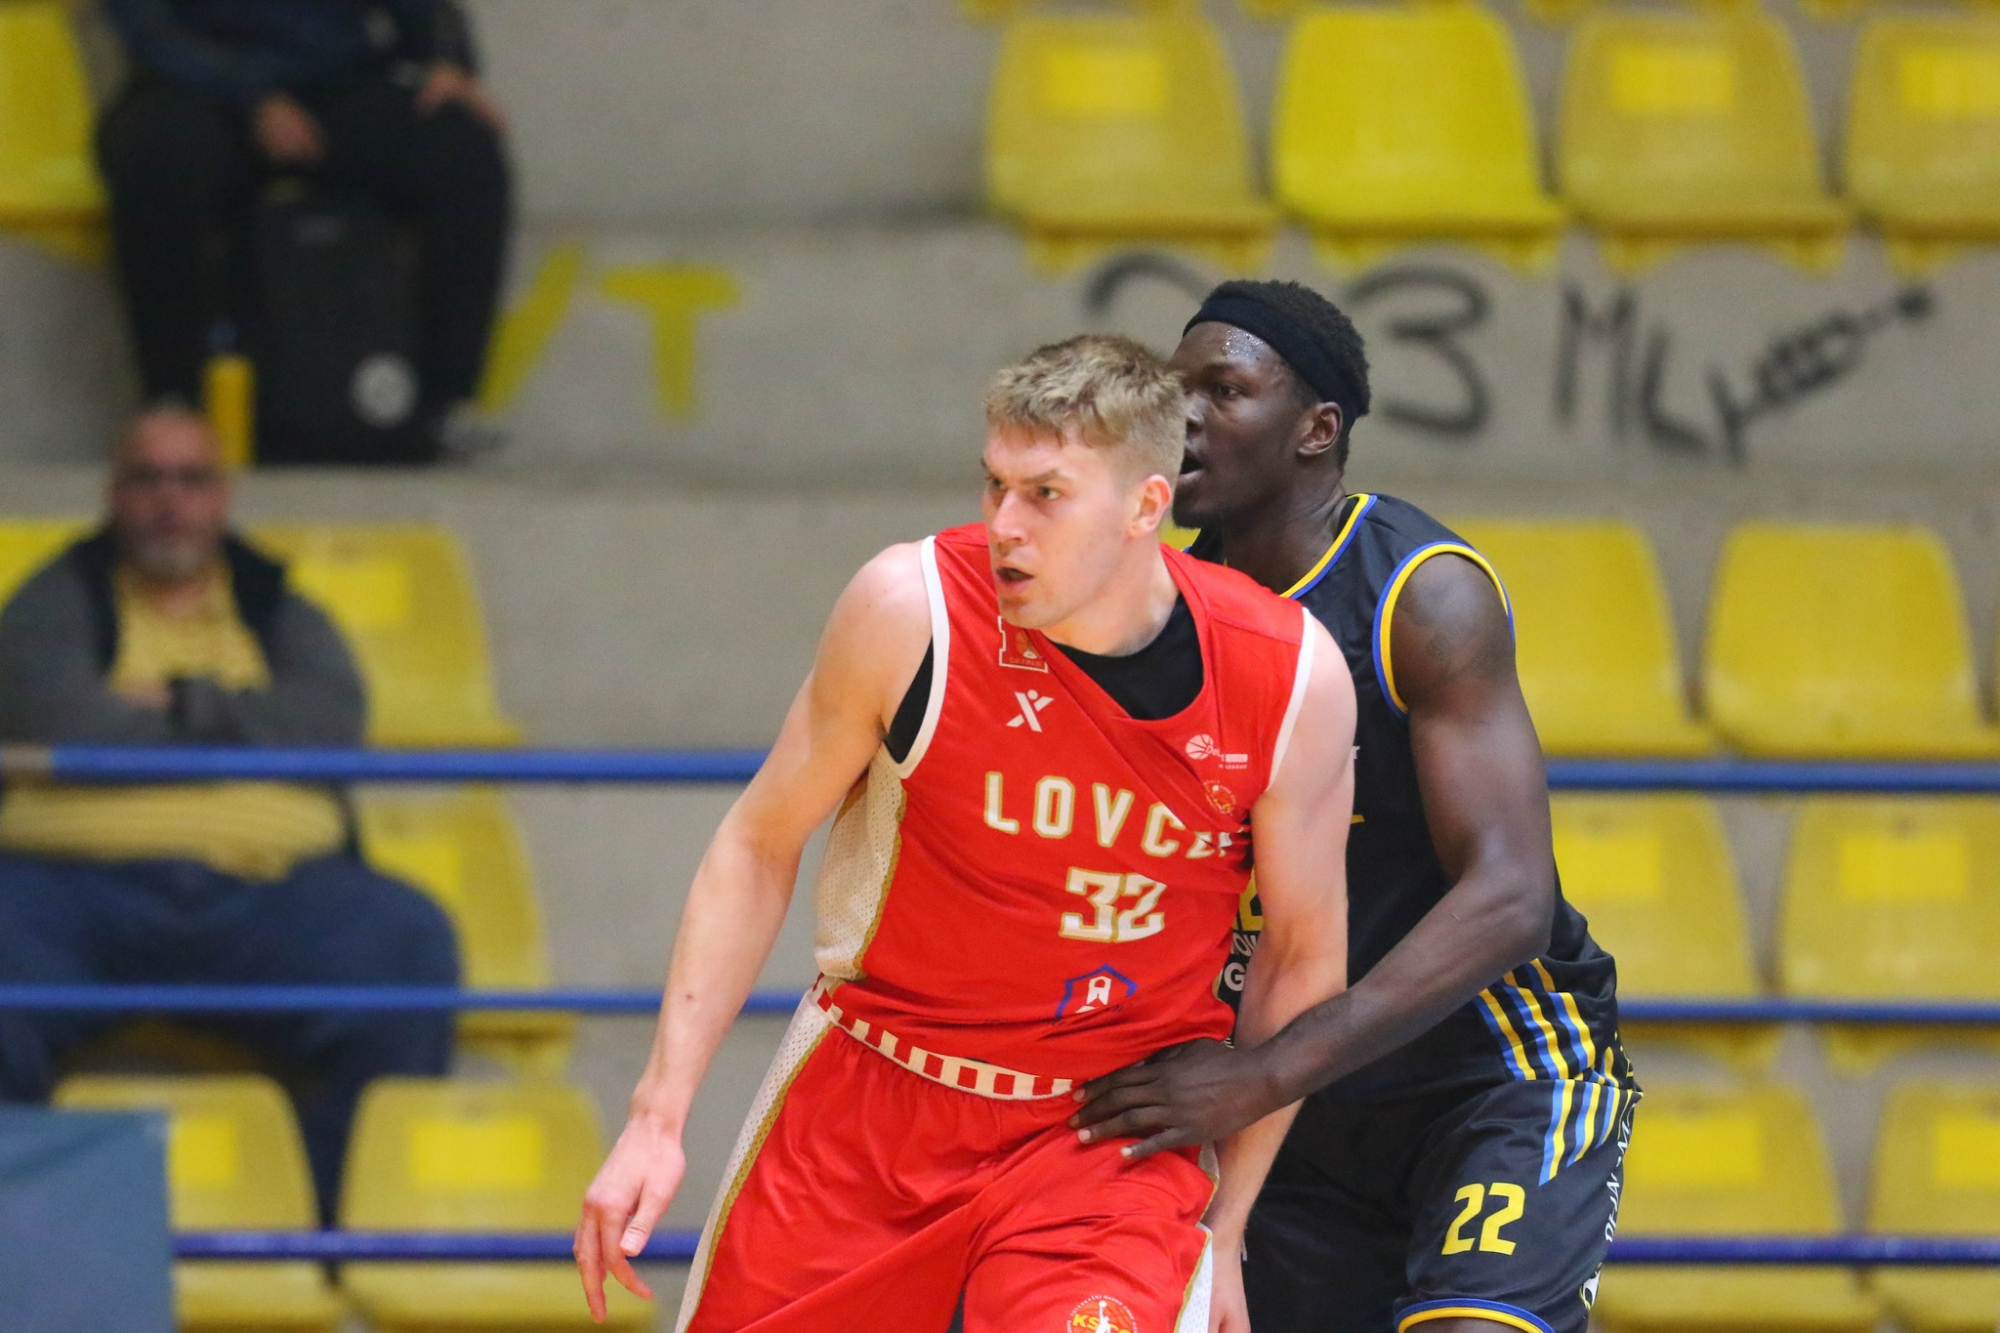 Payabl EKA AEL snatched a good win over Lovcen at home